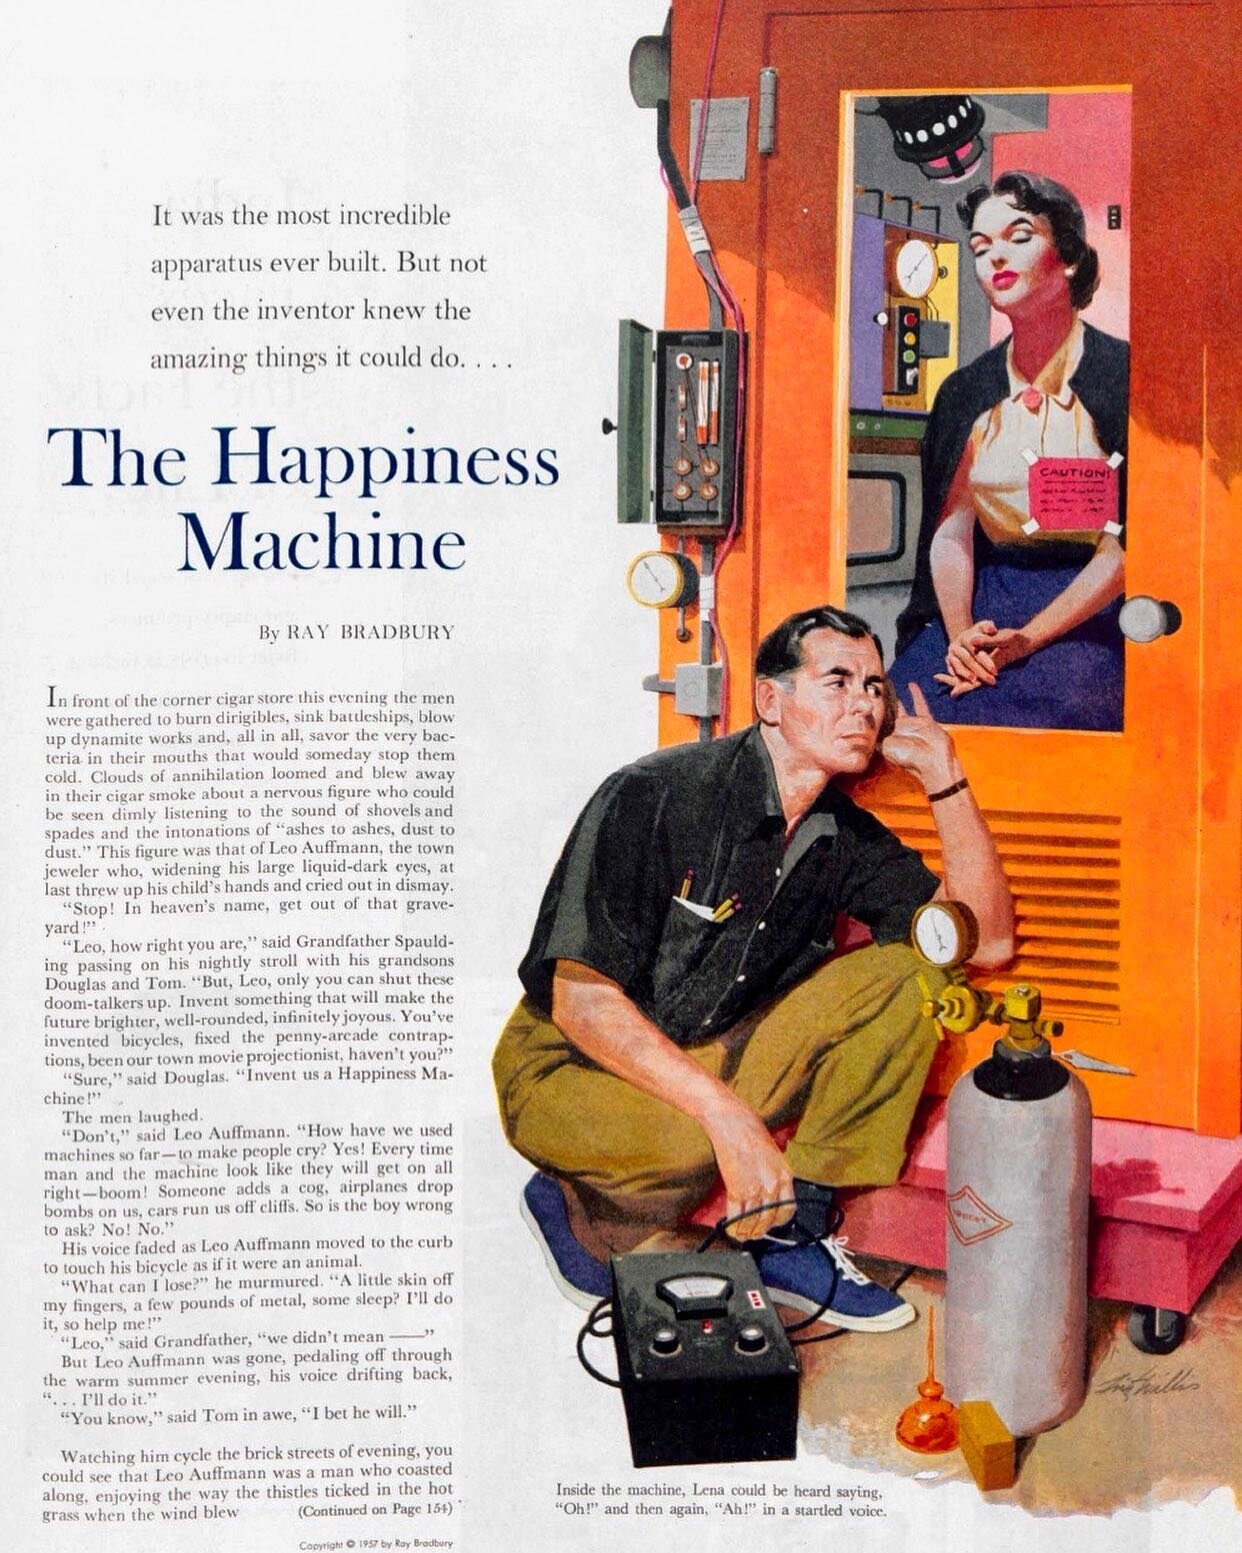 If you&rsquo;re looking for the secret to happiness, Ray Bradbury&rsquo;s &ldquo;The Happiness Machine&rdquo; offers a timeless lesson.

A machine promises infinite joy and escape from life's hardships, but as the story&rsquo;s characters soon discov